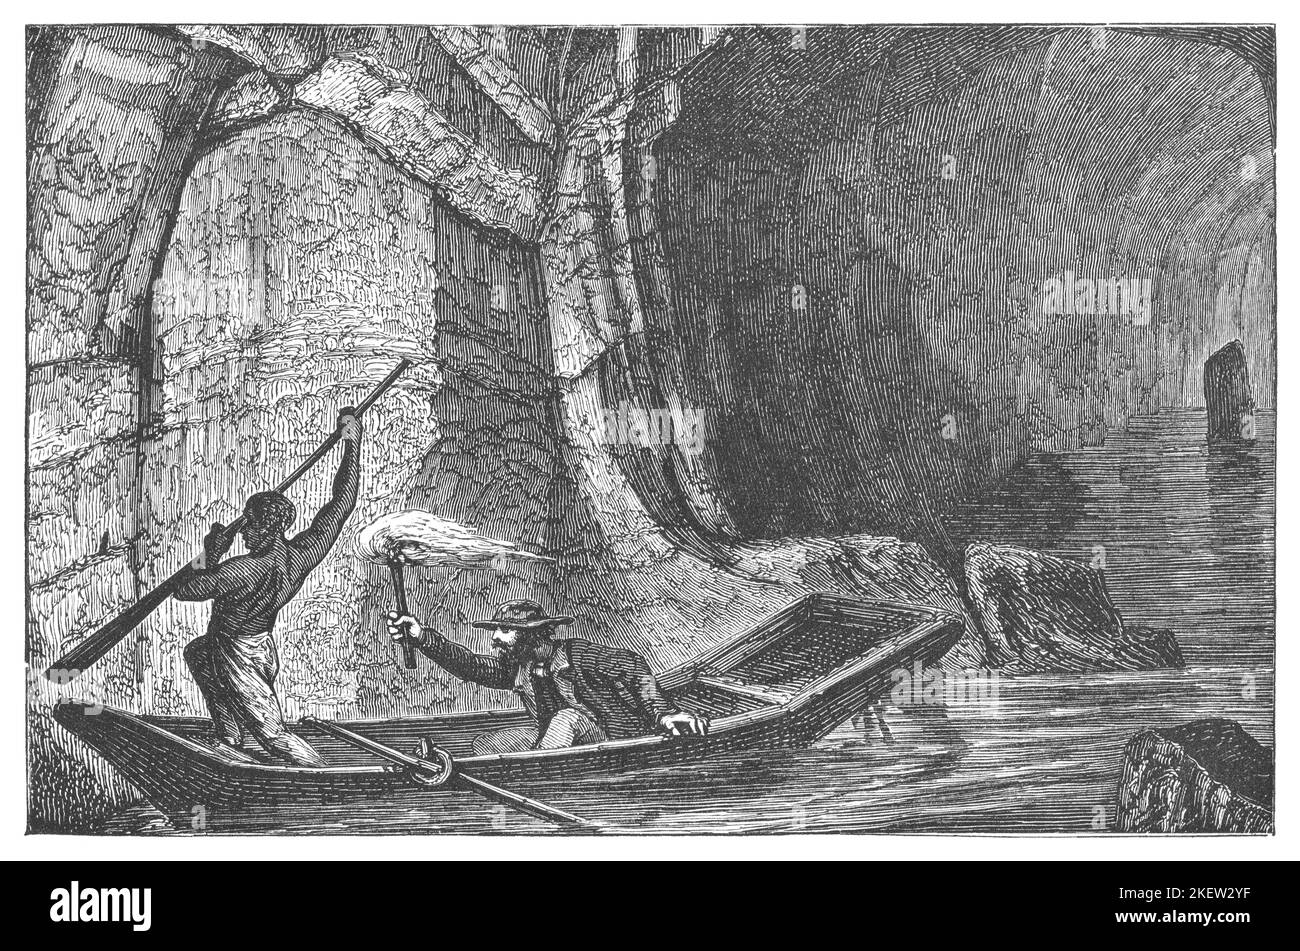 Two men in rowing boat explore the river in the Mammoth Cave of Kentucky USA engraving from antique book Natures Wonders published in London UK, 1867. Stock Photo